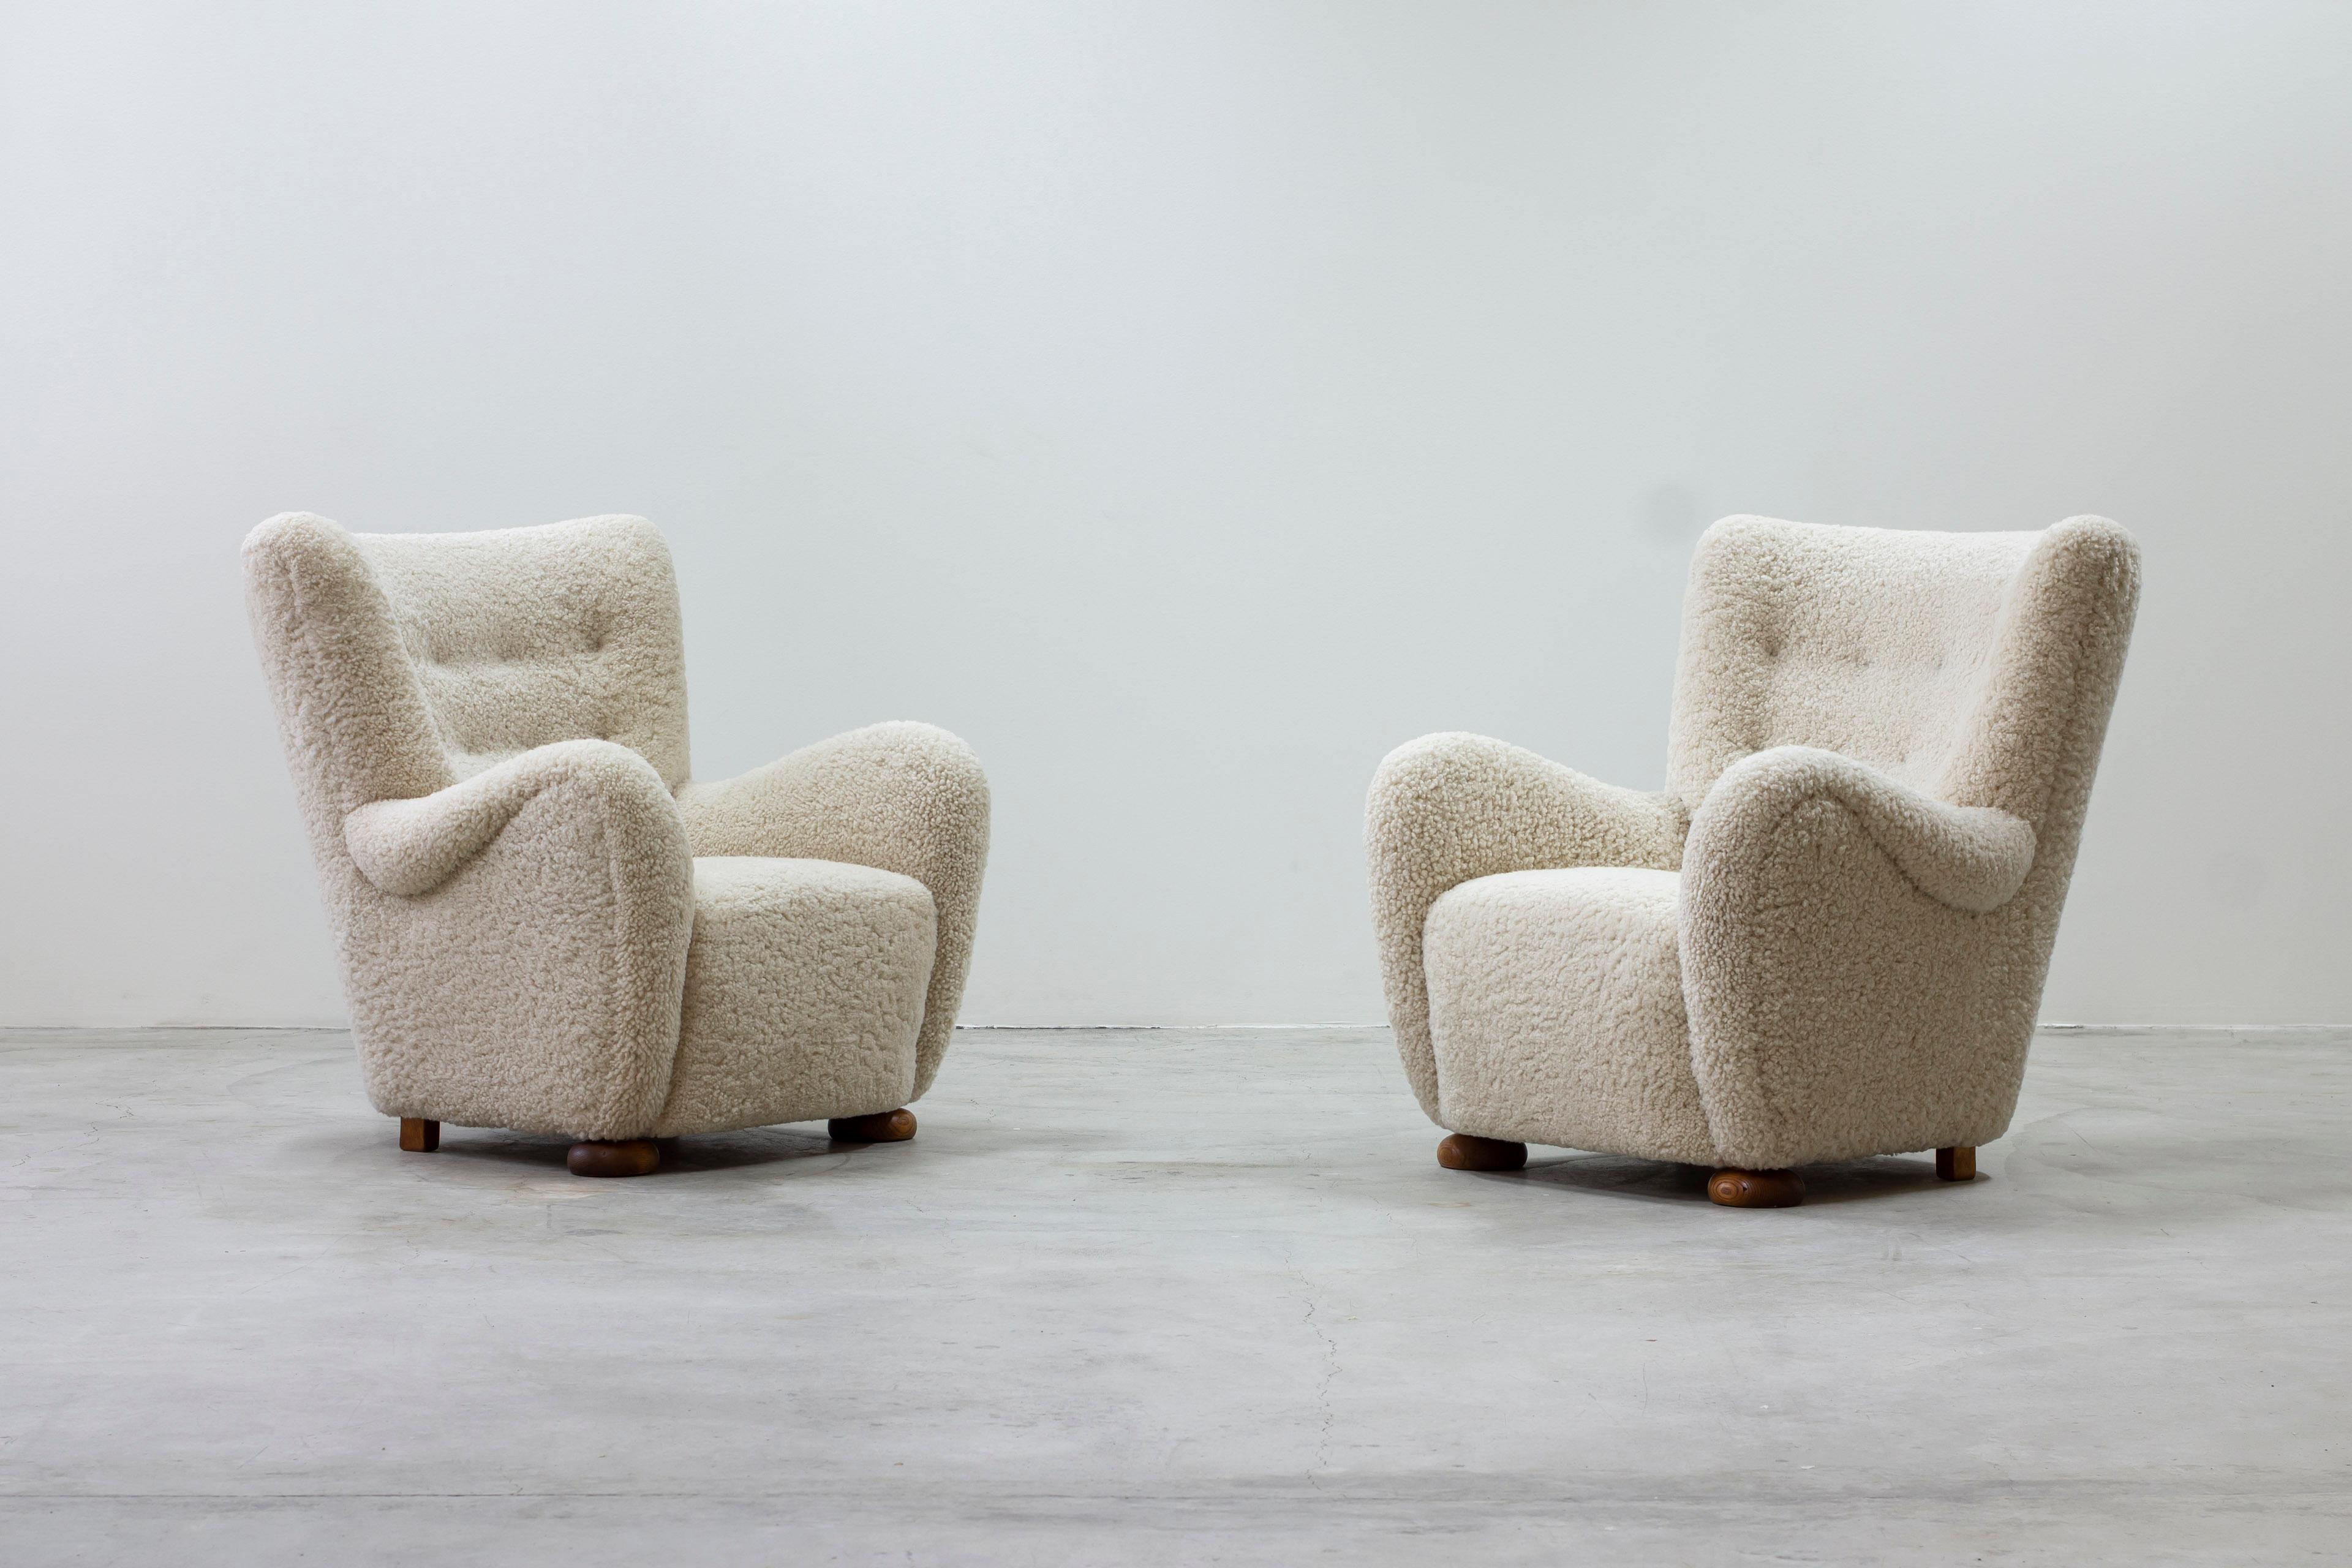 Pair of lounge chairs in the manner of Märta Blomstedt. Designed and produced in Denmark by Danish cabinetmaker. Legs in oak and off white sheepskin upholstery. Upholstery is new and in excellent condition. Very good condition with few signs of